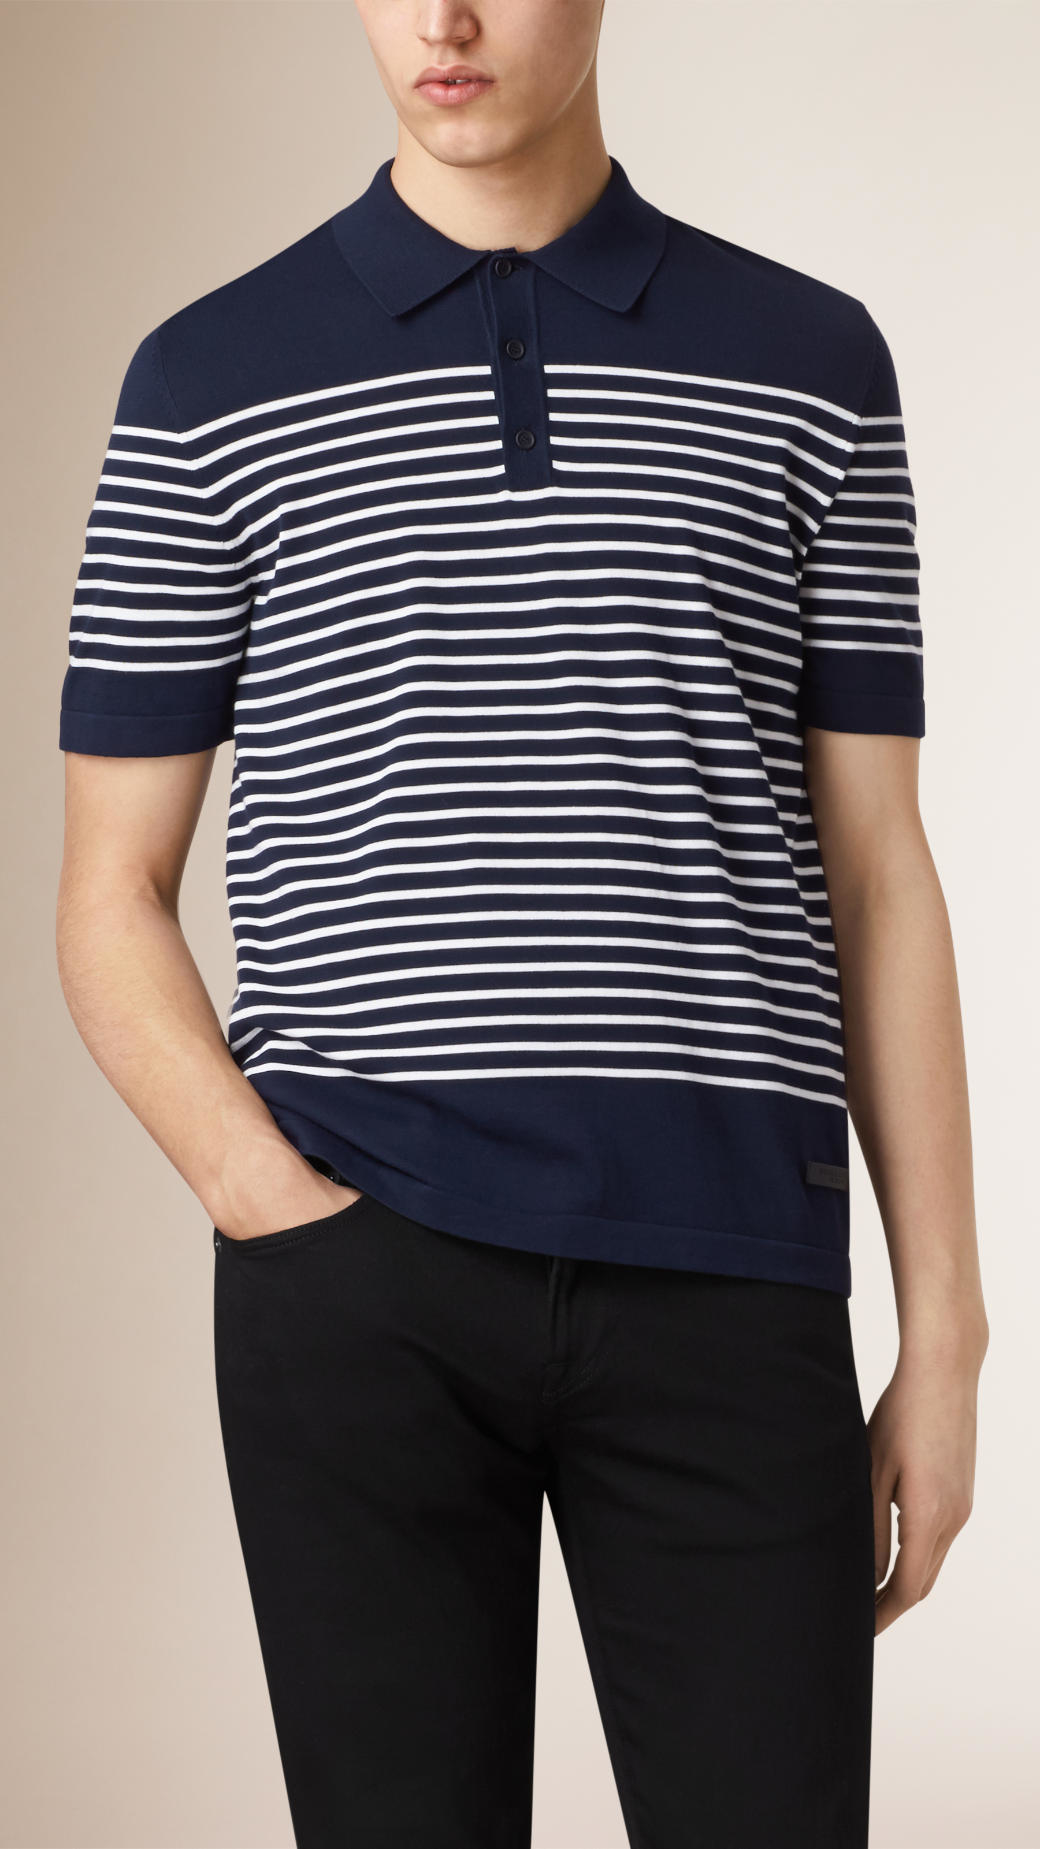 navy blue and white striped polo shirt